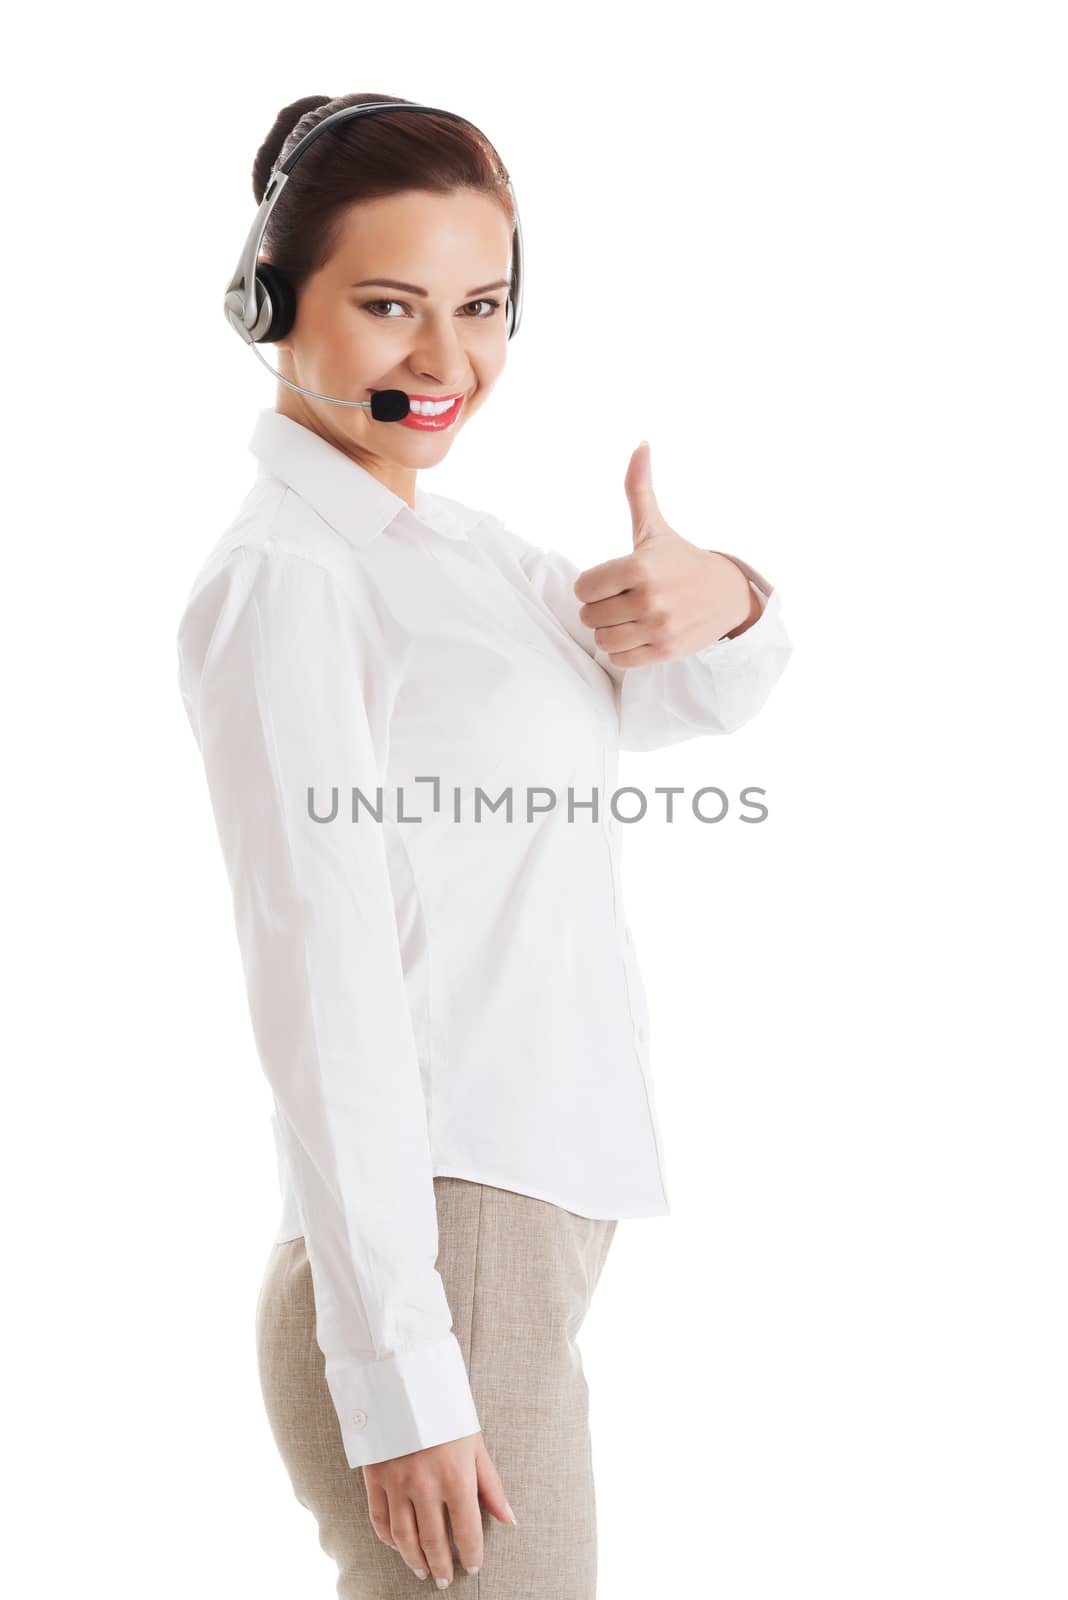 Beautiful woman on call center, showing OK. Islated on white.